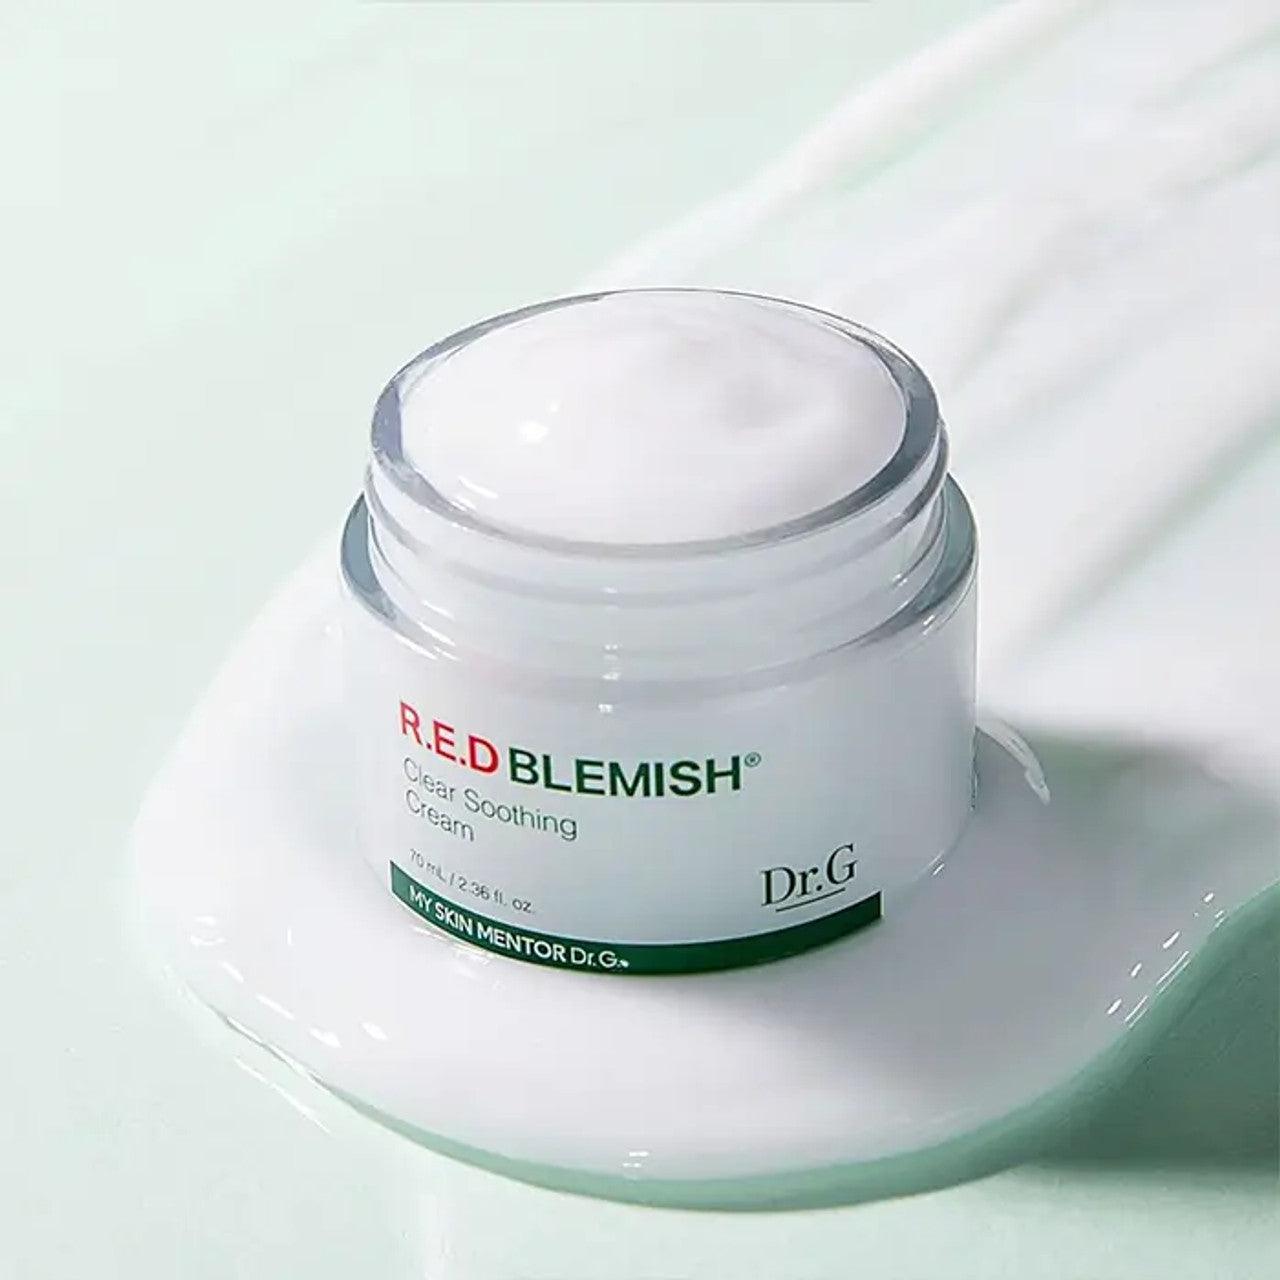 R.E.D Blemish Clear Soothing Cream - 70ml